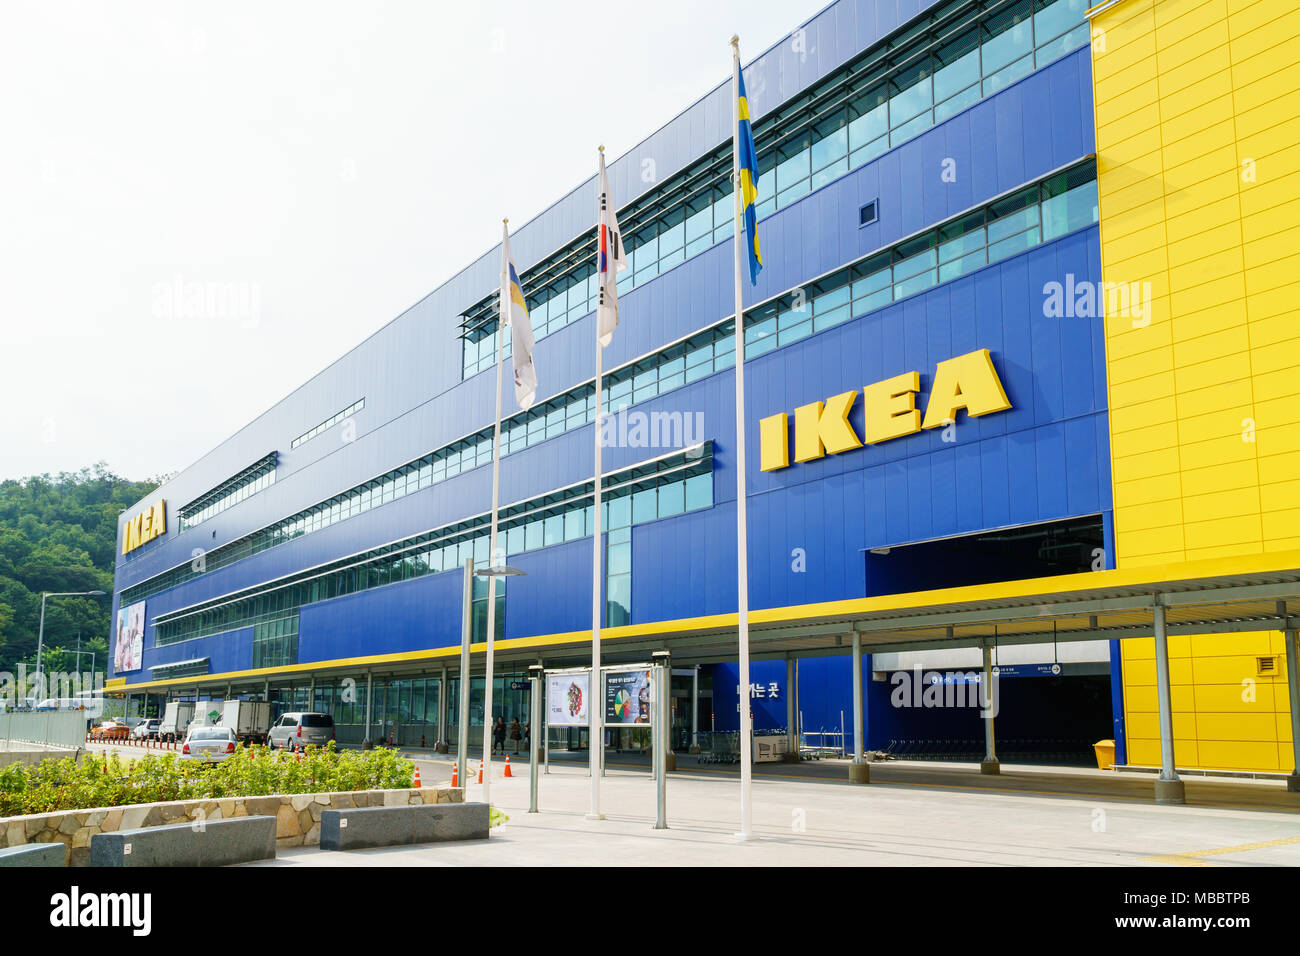 Gwangmyeong Korea September 14 15 Whole View Of Gwangmyeong Ikea In Korea Ikea Is A Multinational Company That Designs And Sells Furniture Ap Stock Photo Alamy